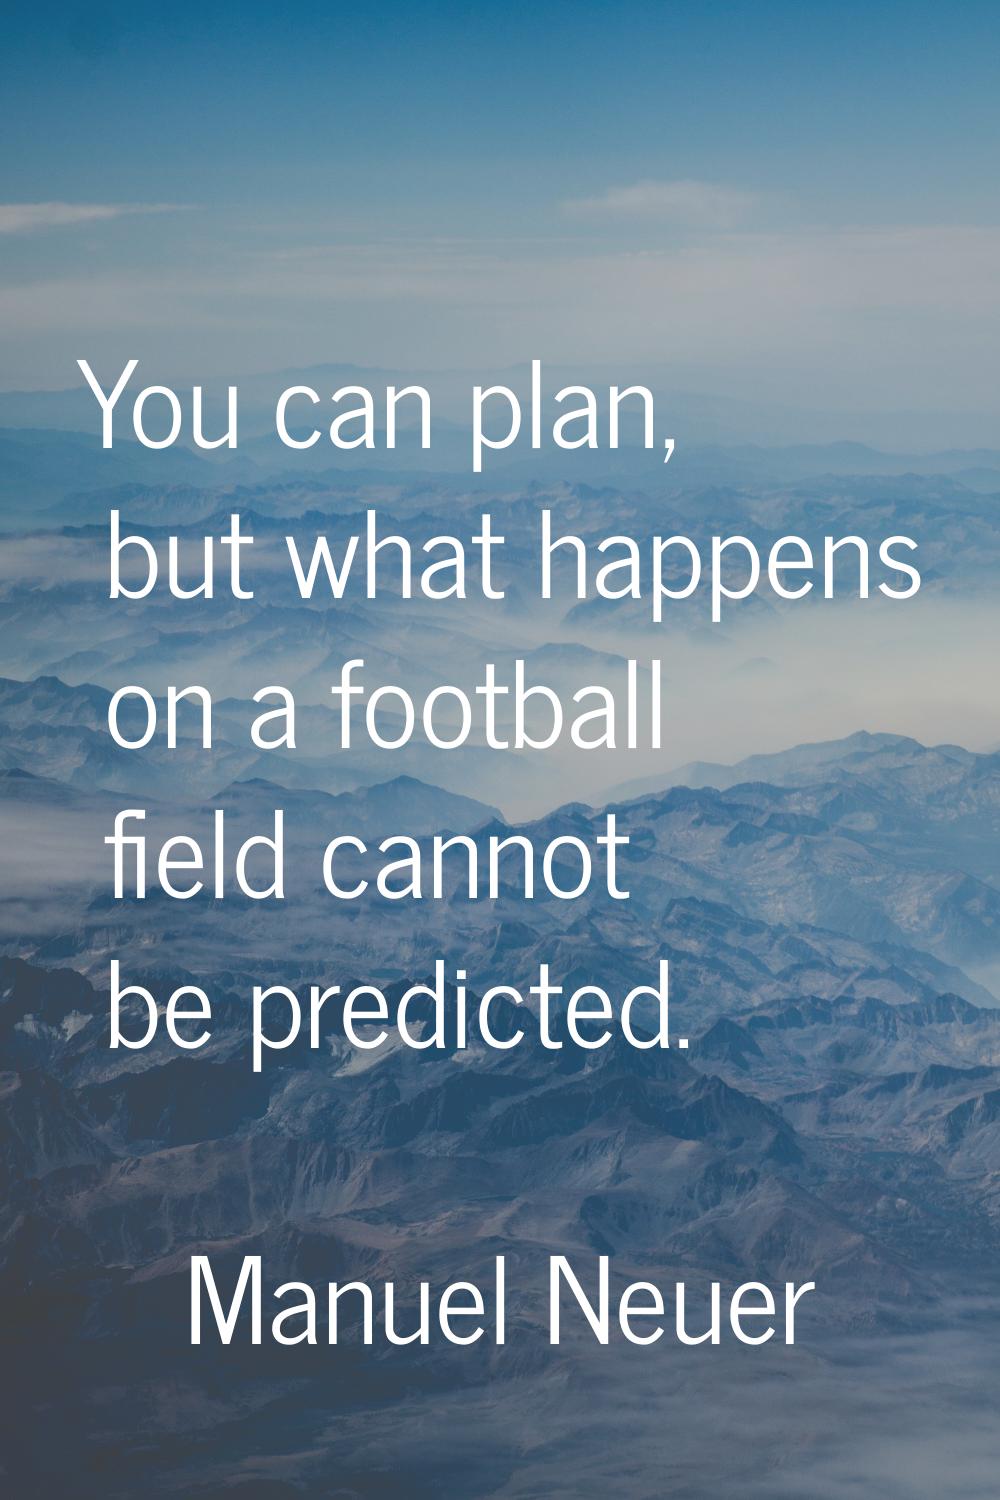 You can plan, but what happens on a football field cannot be predicted.